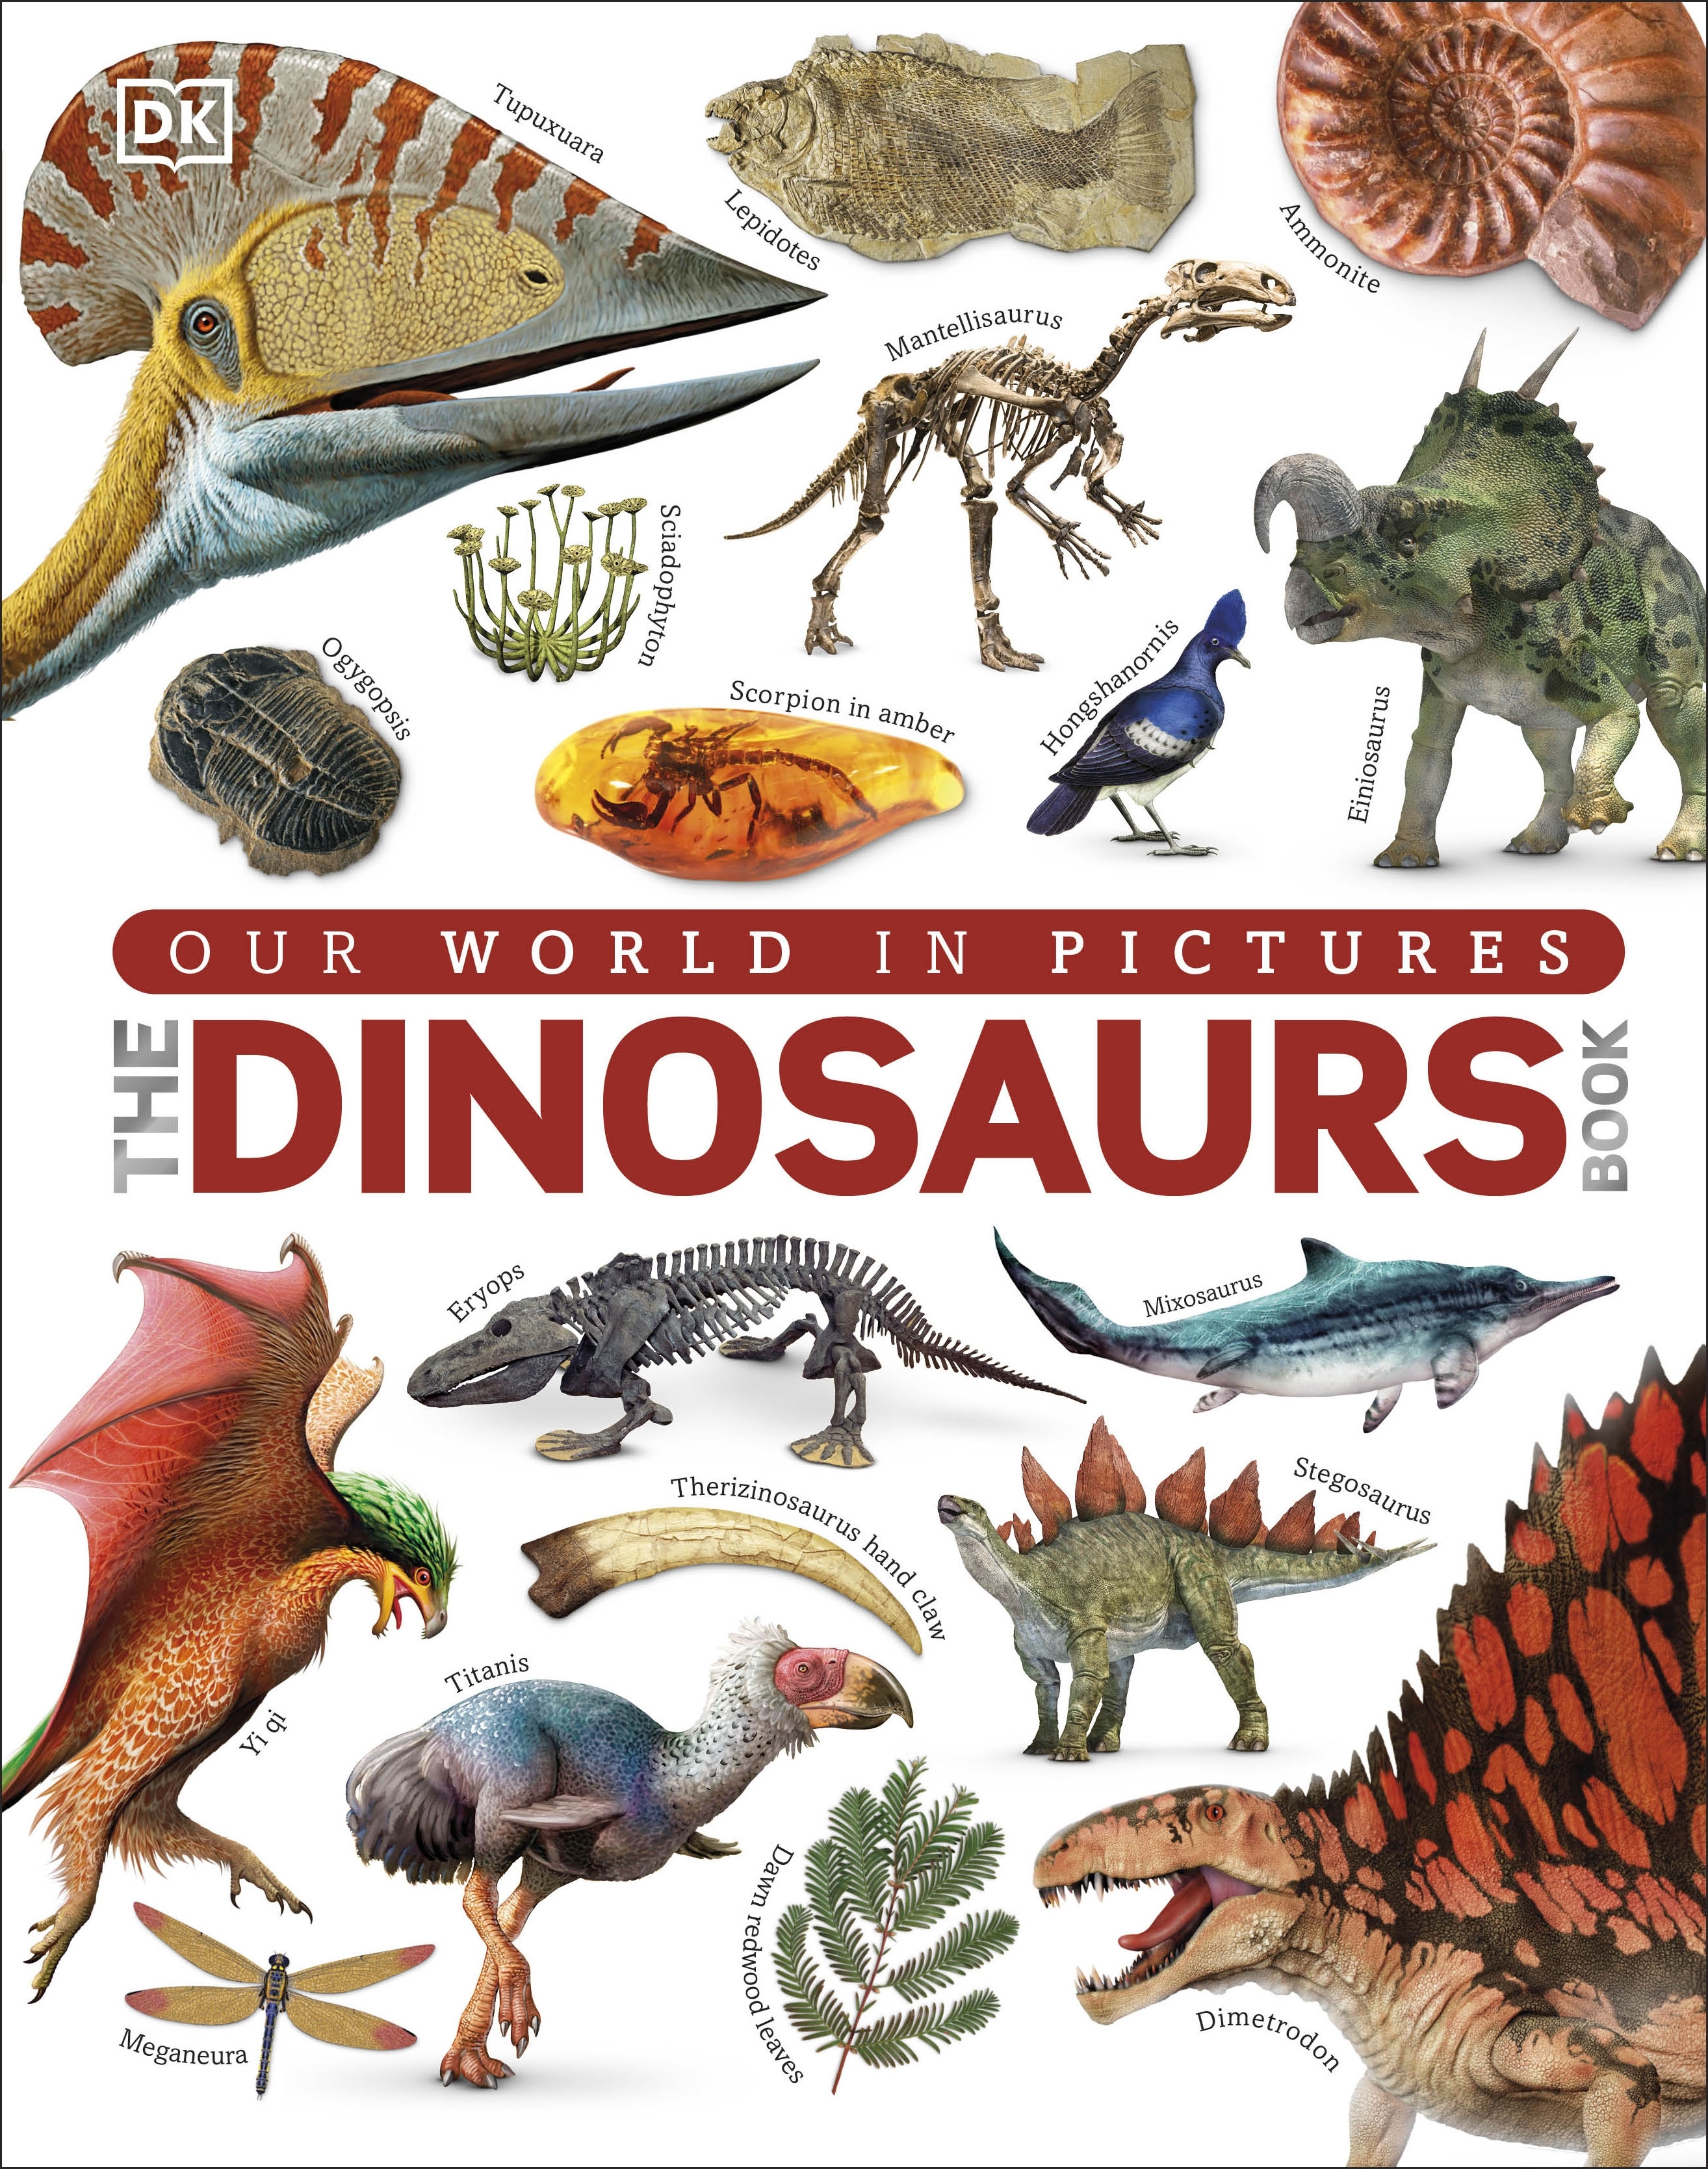 Dinosaur Books For Adults